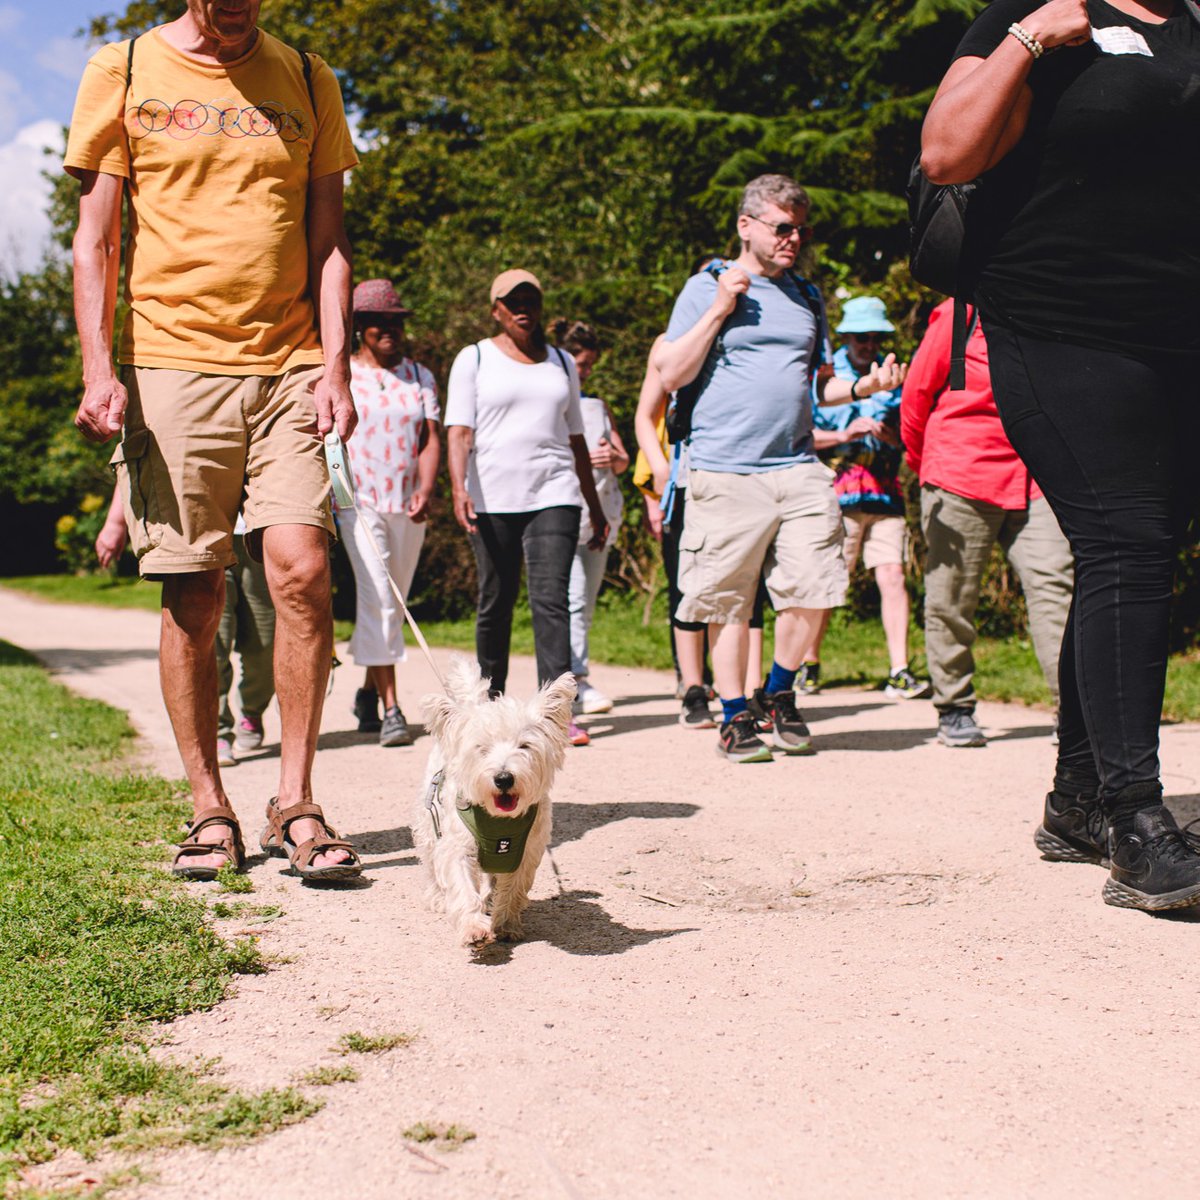 Come and join St Christopher's Healthy Walks, happening every Thursday at Crystal Palace Park! All are invited to join and it's free! It's the perfect training for our Fun Walk, this May: bit.ly/3TCnCwG Find out more about Healthy Walks: bit.ly/3uzVTmt